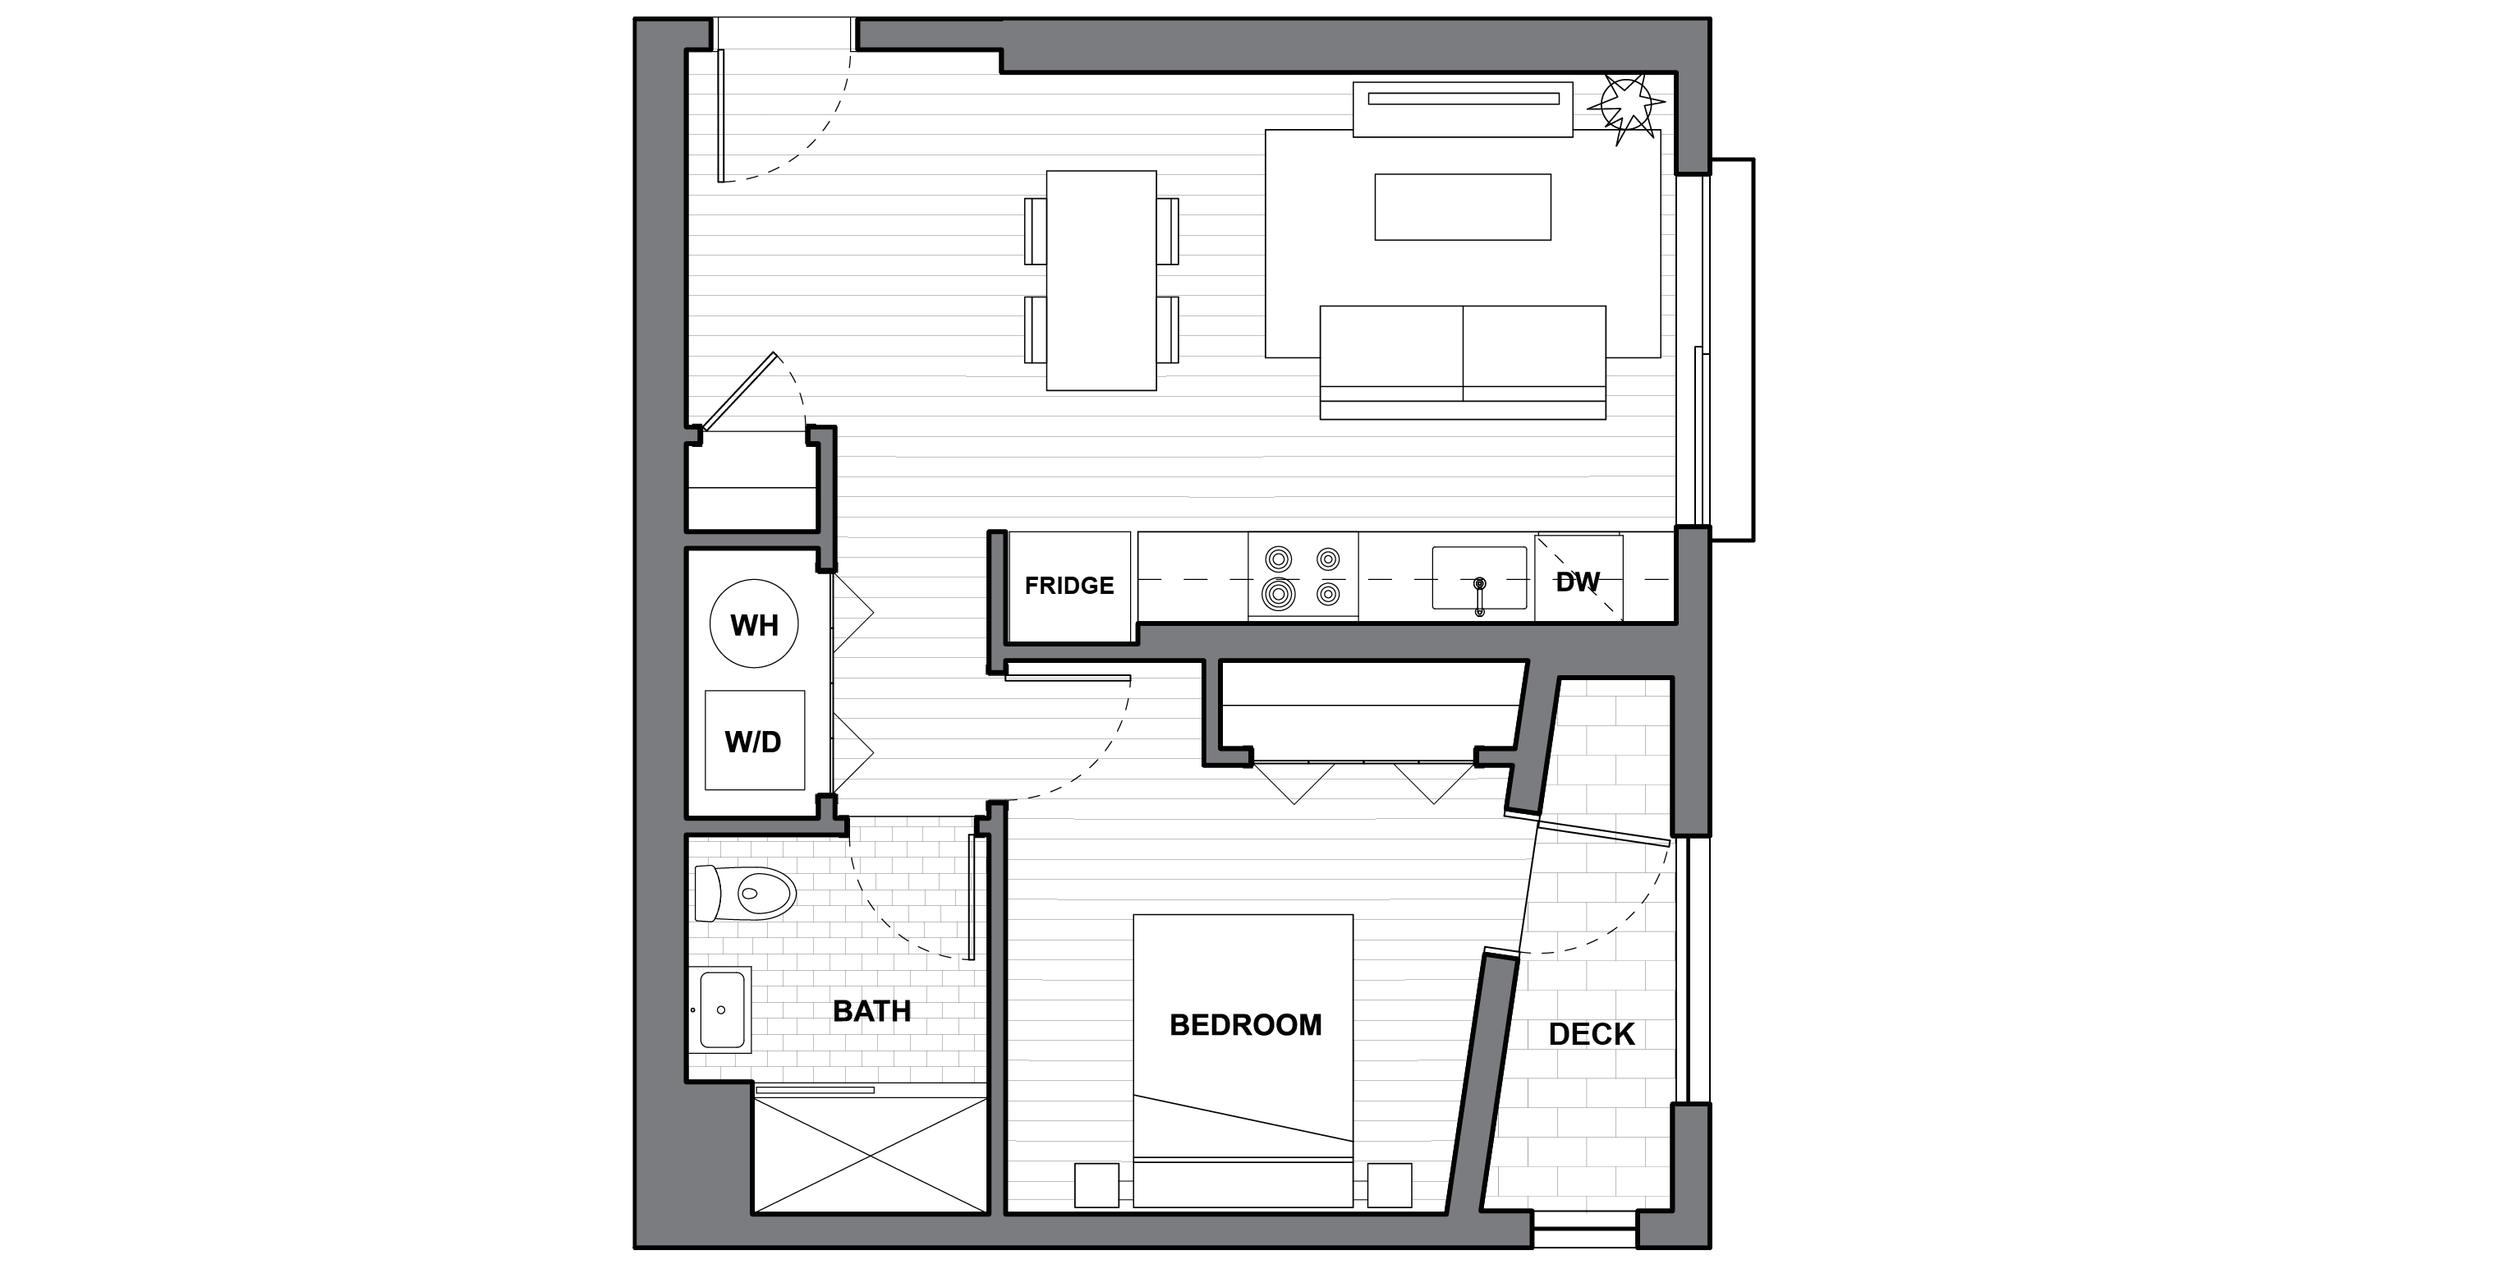   UNIT PH402  1 BEDROOM / 1 BATH PRIVATE ROOF DECK 592 SQUARE FEET   REQUEST INFORMATION / APPLY FOR THIS UNIT   